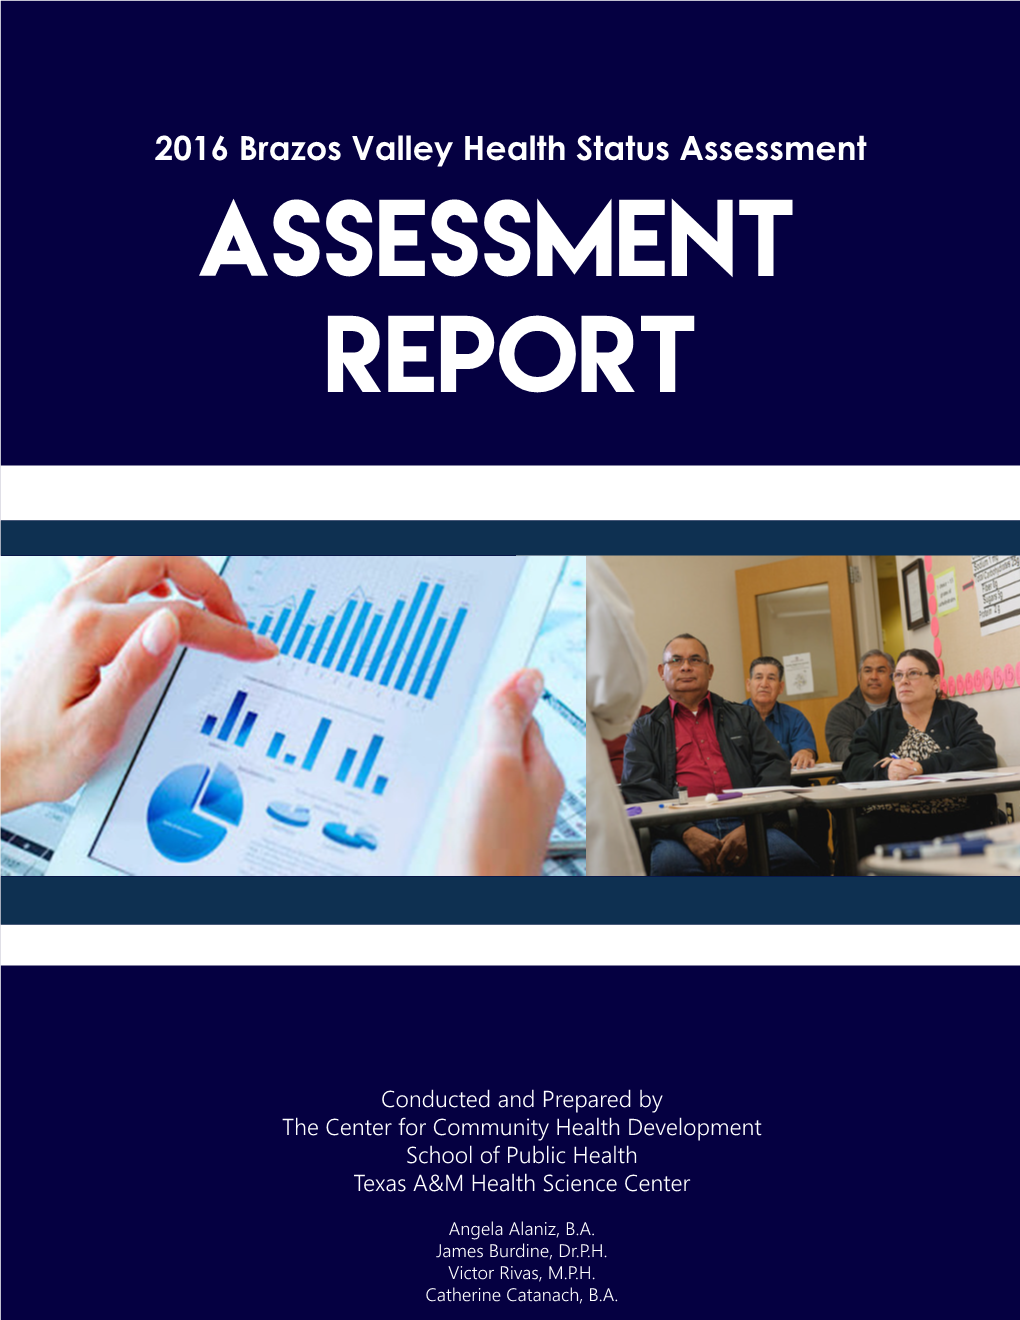 Greater Brazos Valley Health Assessment Report